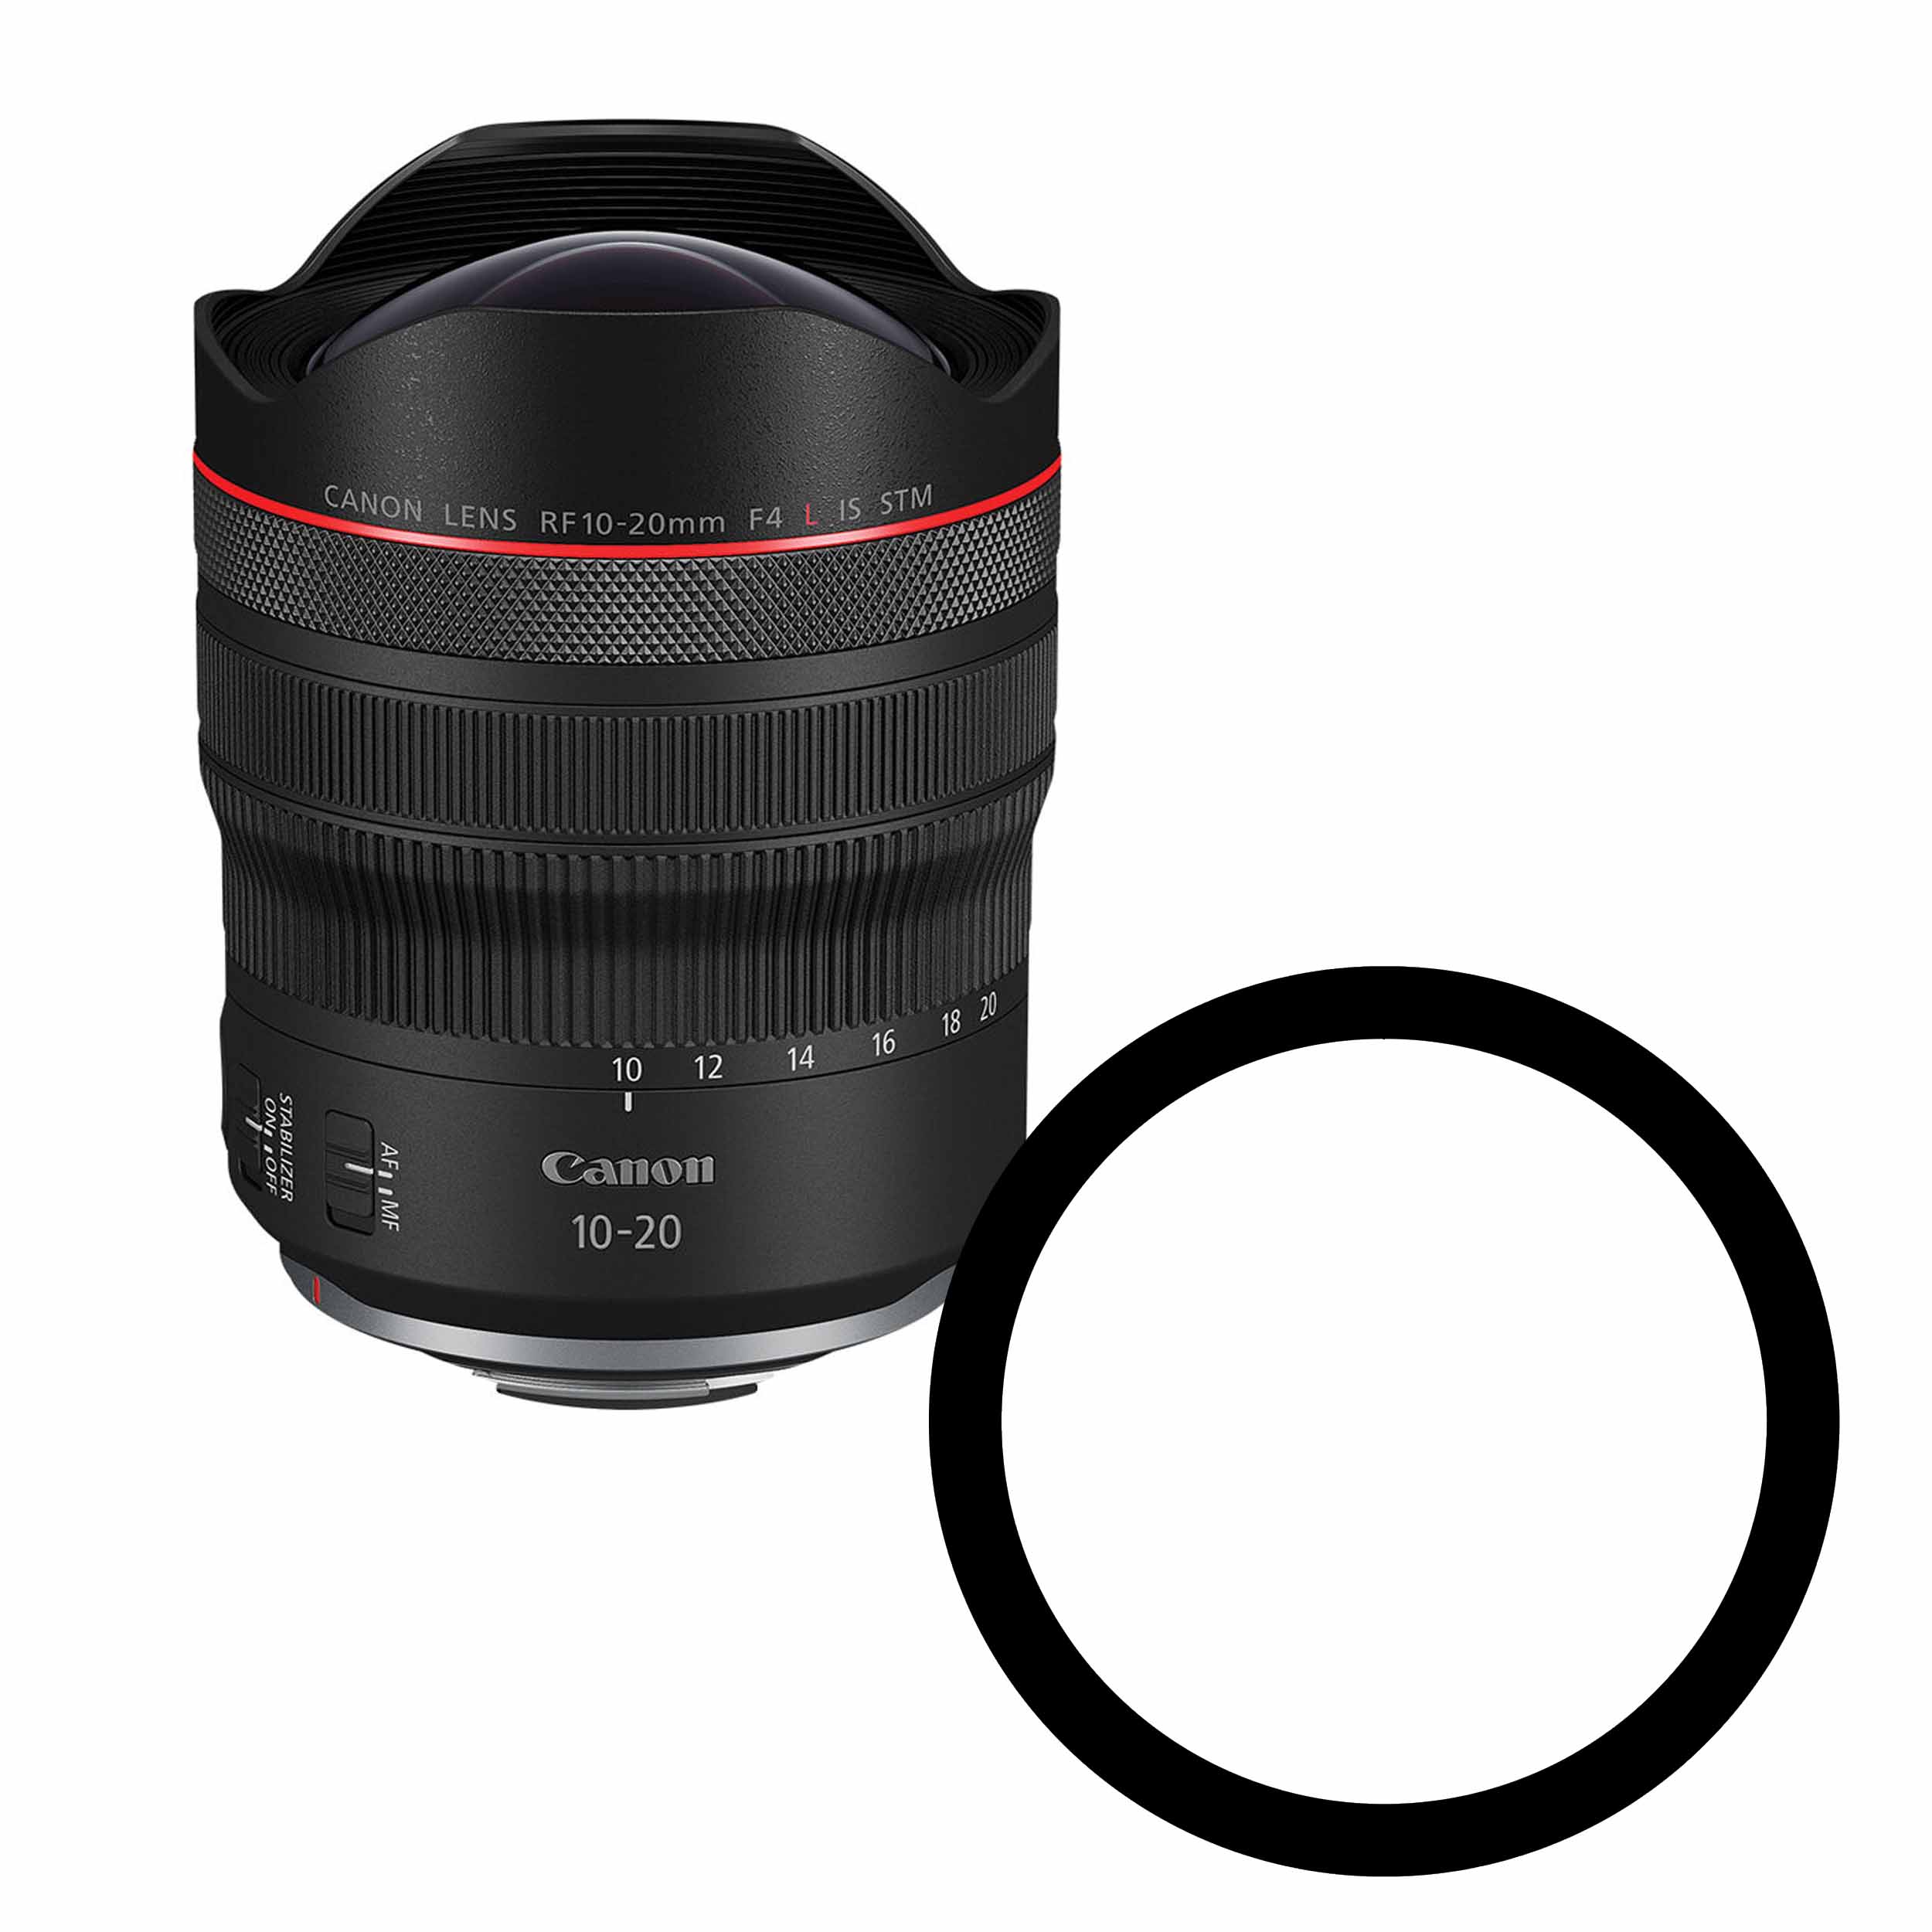 Ikelite Anti-Reflection Ring for Canon RF 10-20mm f/4L IS STM Lens